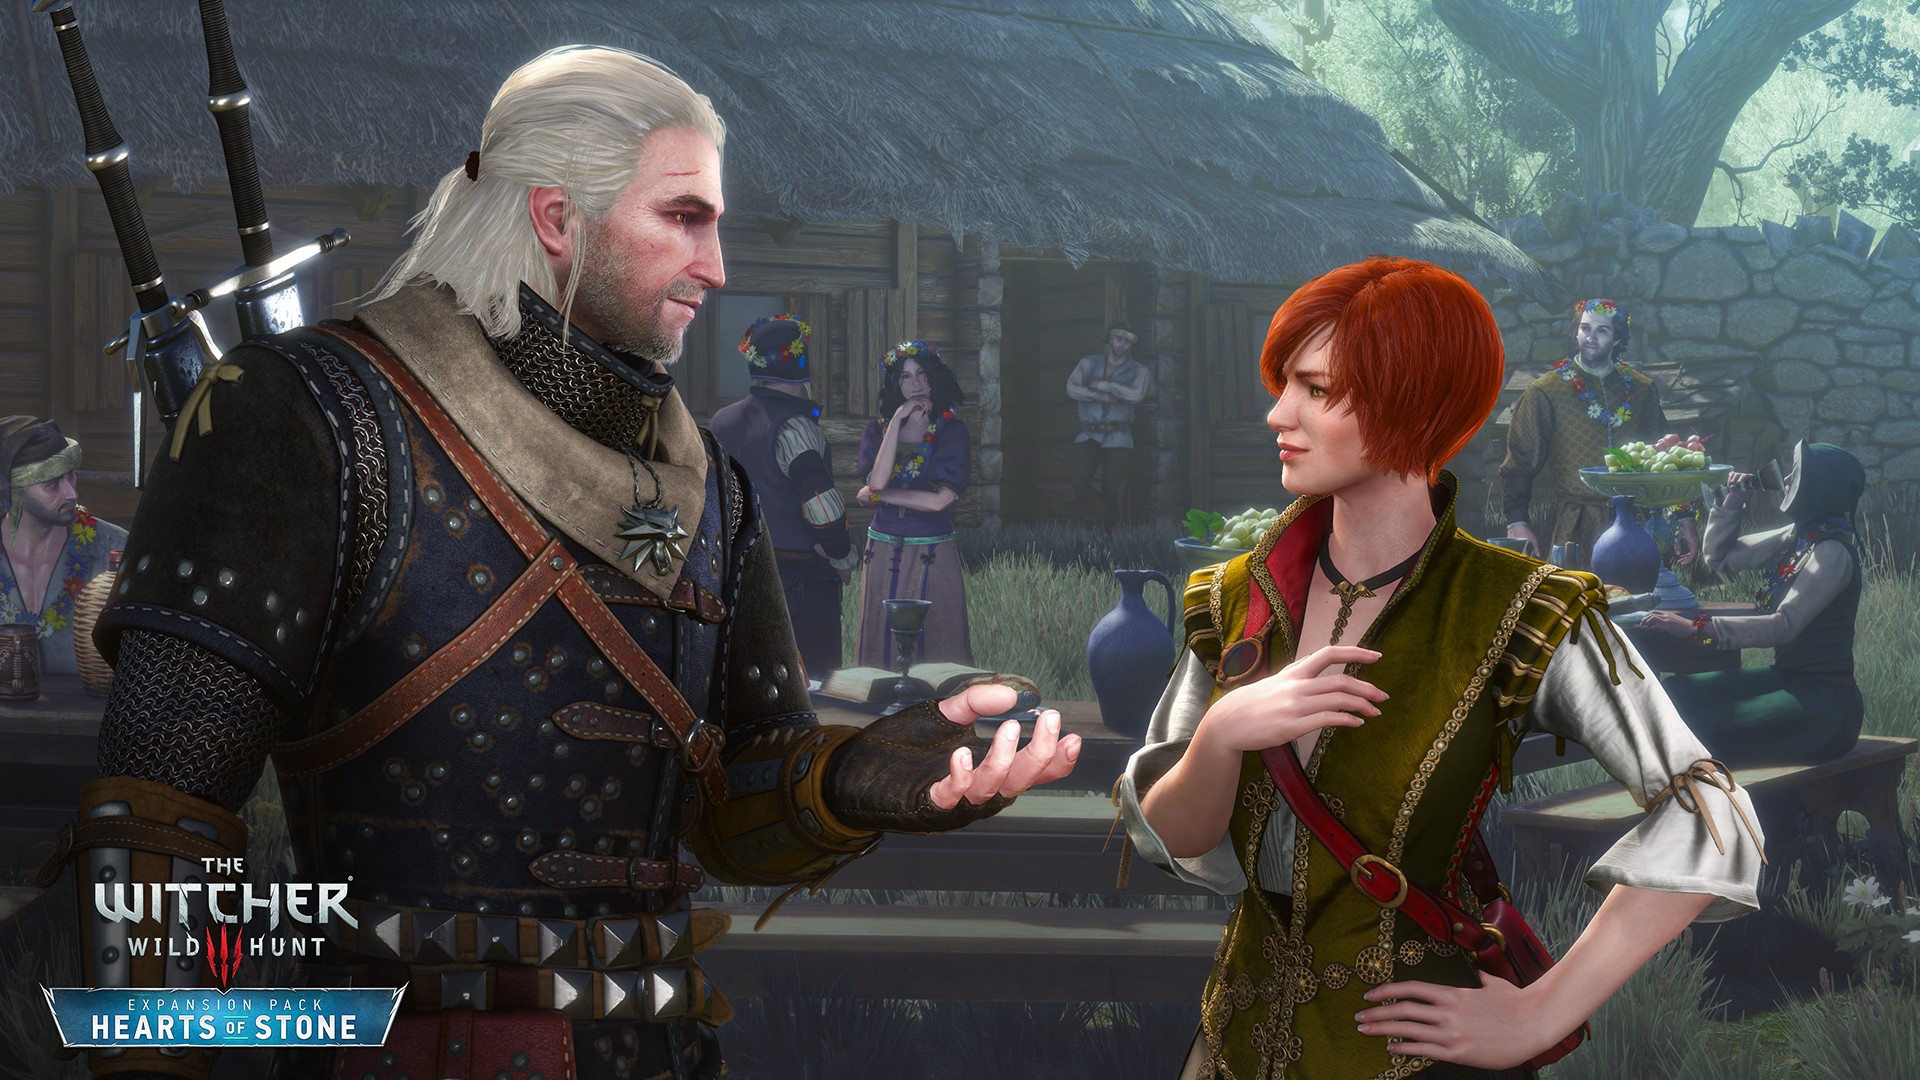 the witcher 3 wild hunt ps4 dlc hearts of stone not showing